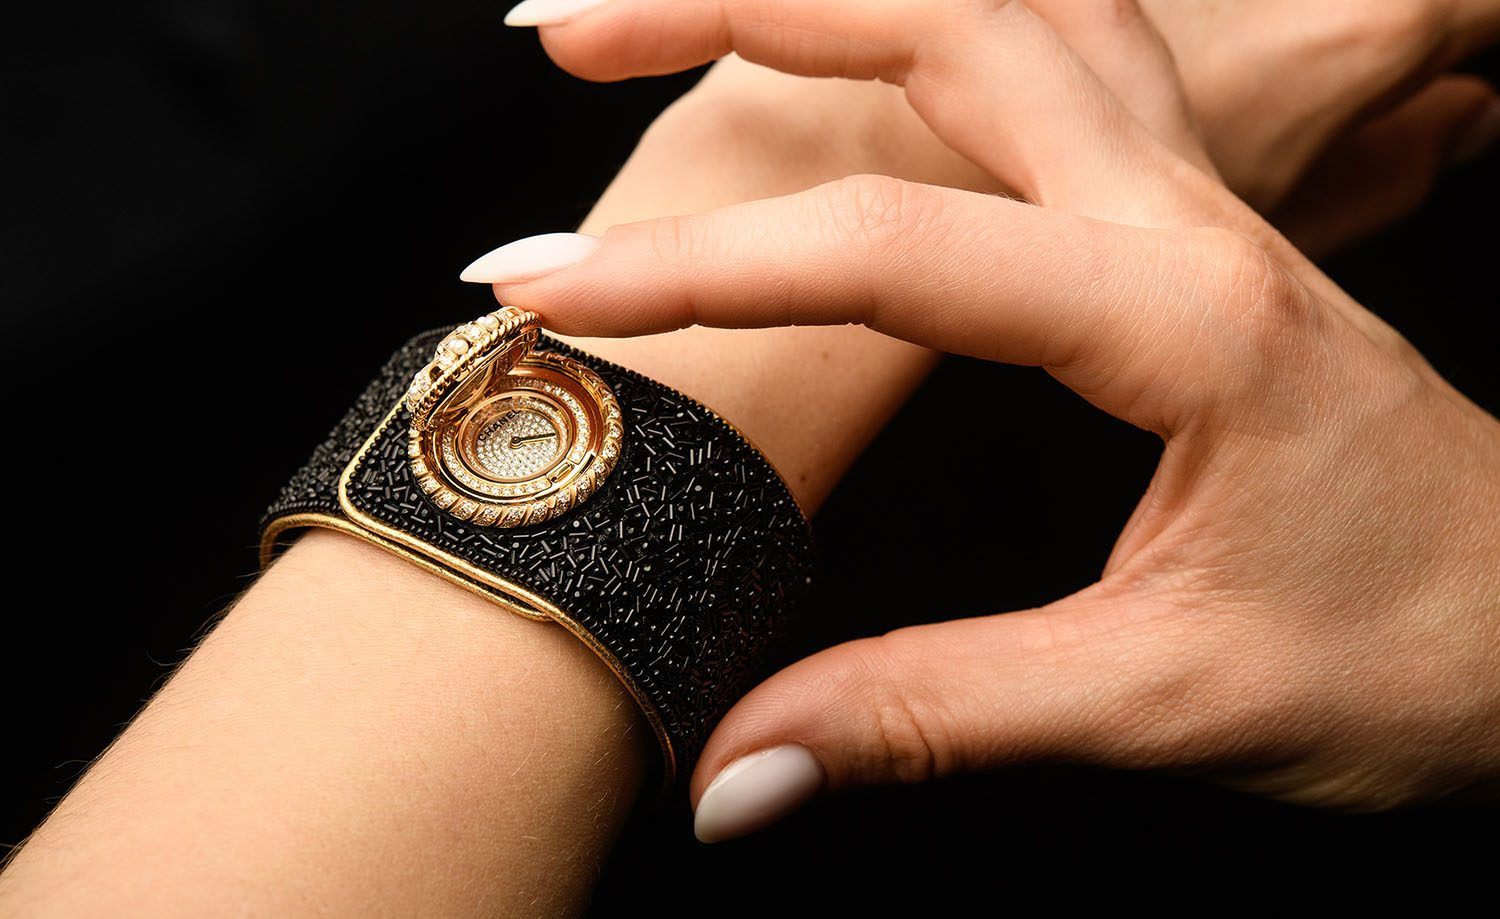 How Chanel Turned a Button into the Ultimate Secret Watch